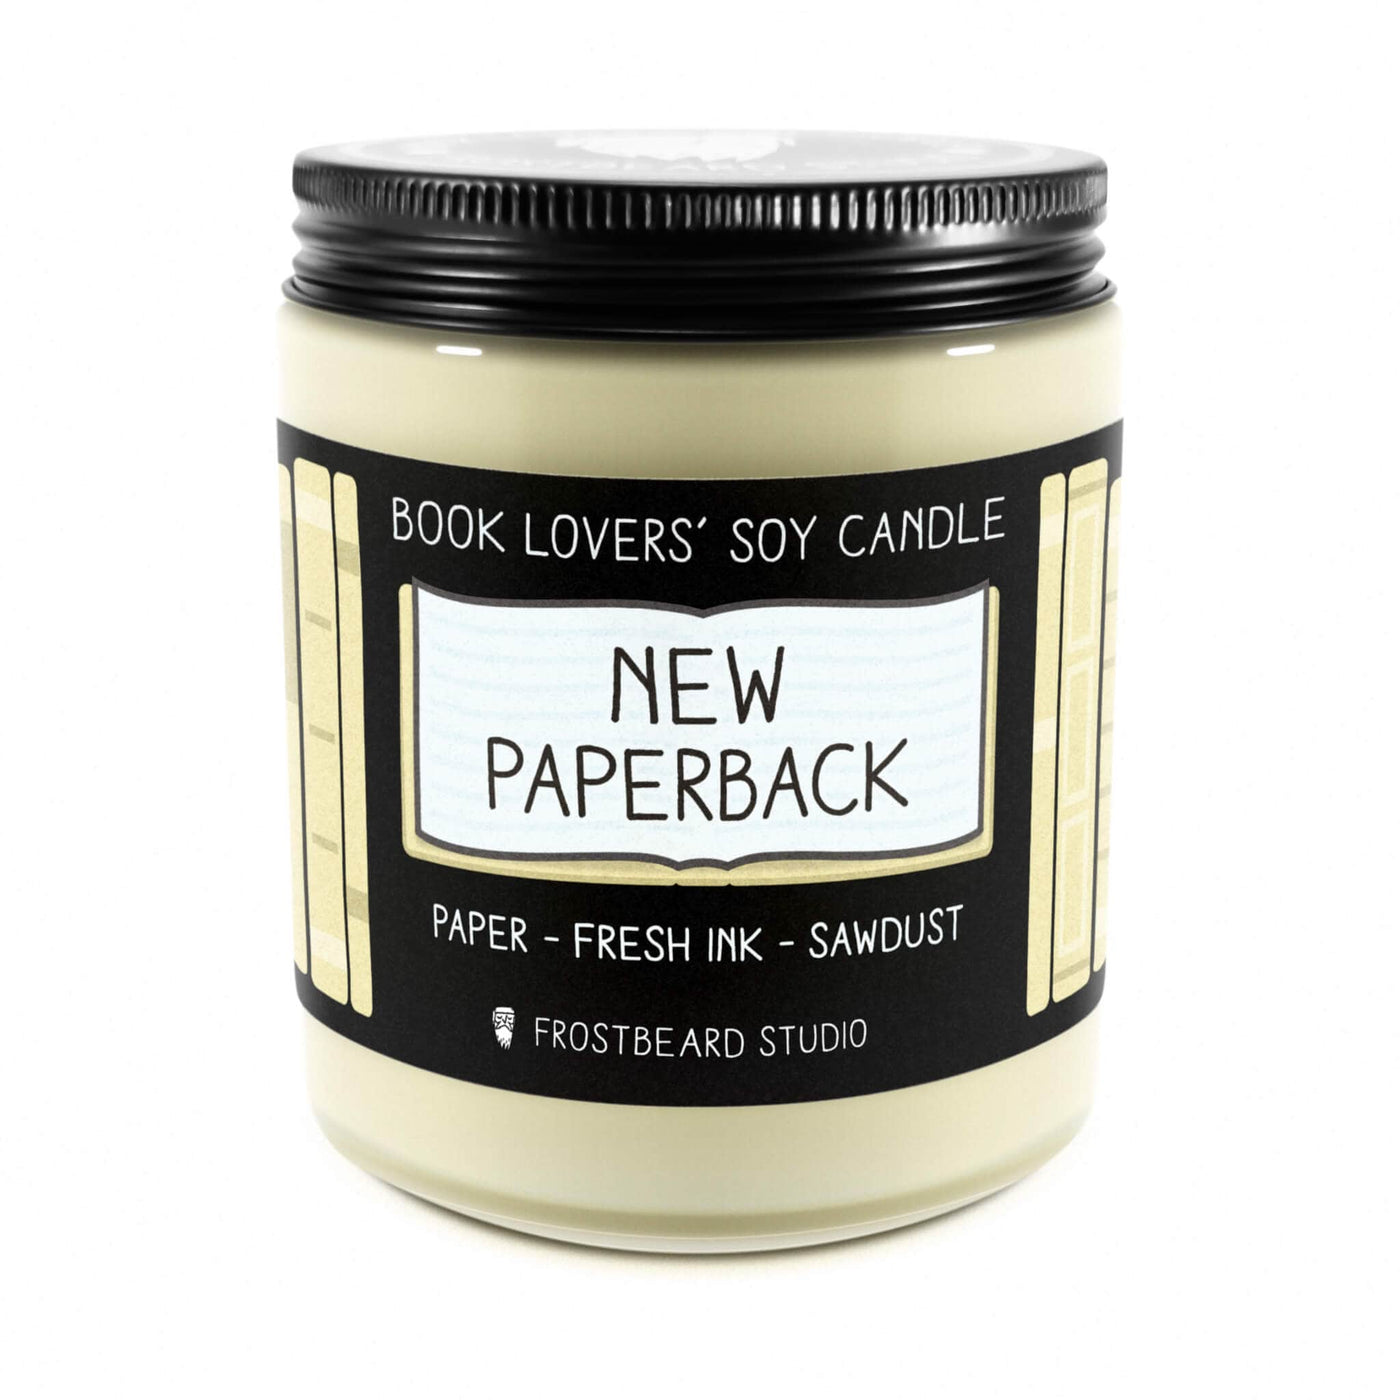 New Paperback  -  8 oz Jar  -  Book Lovers' Soy Candle  -  Frostbeard Studio